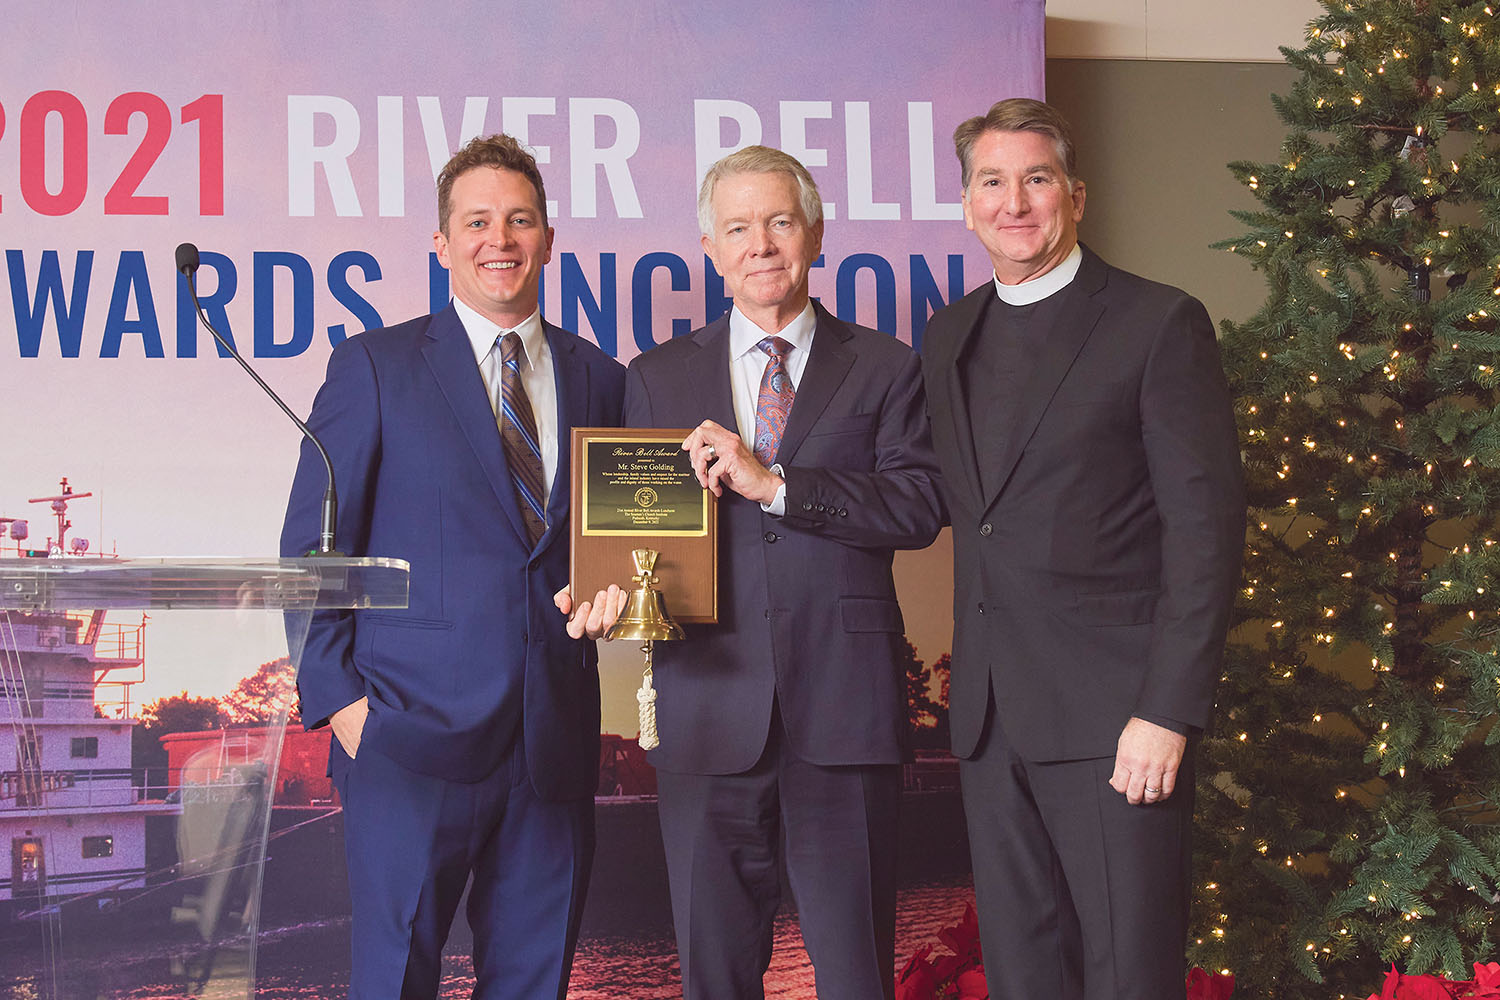 Austin Golding, left, and Rev. Mark Nestlehutt flank Steve Golding, chairman of Golding Barge Line, who received the River Bell Award at the 21st annual River Bell Awards Luncheon in Paducah, Ky., December 9. (Photo courtesy of Seamen's Church Institute)